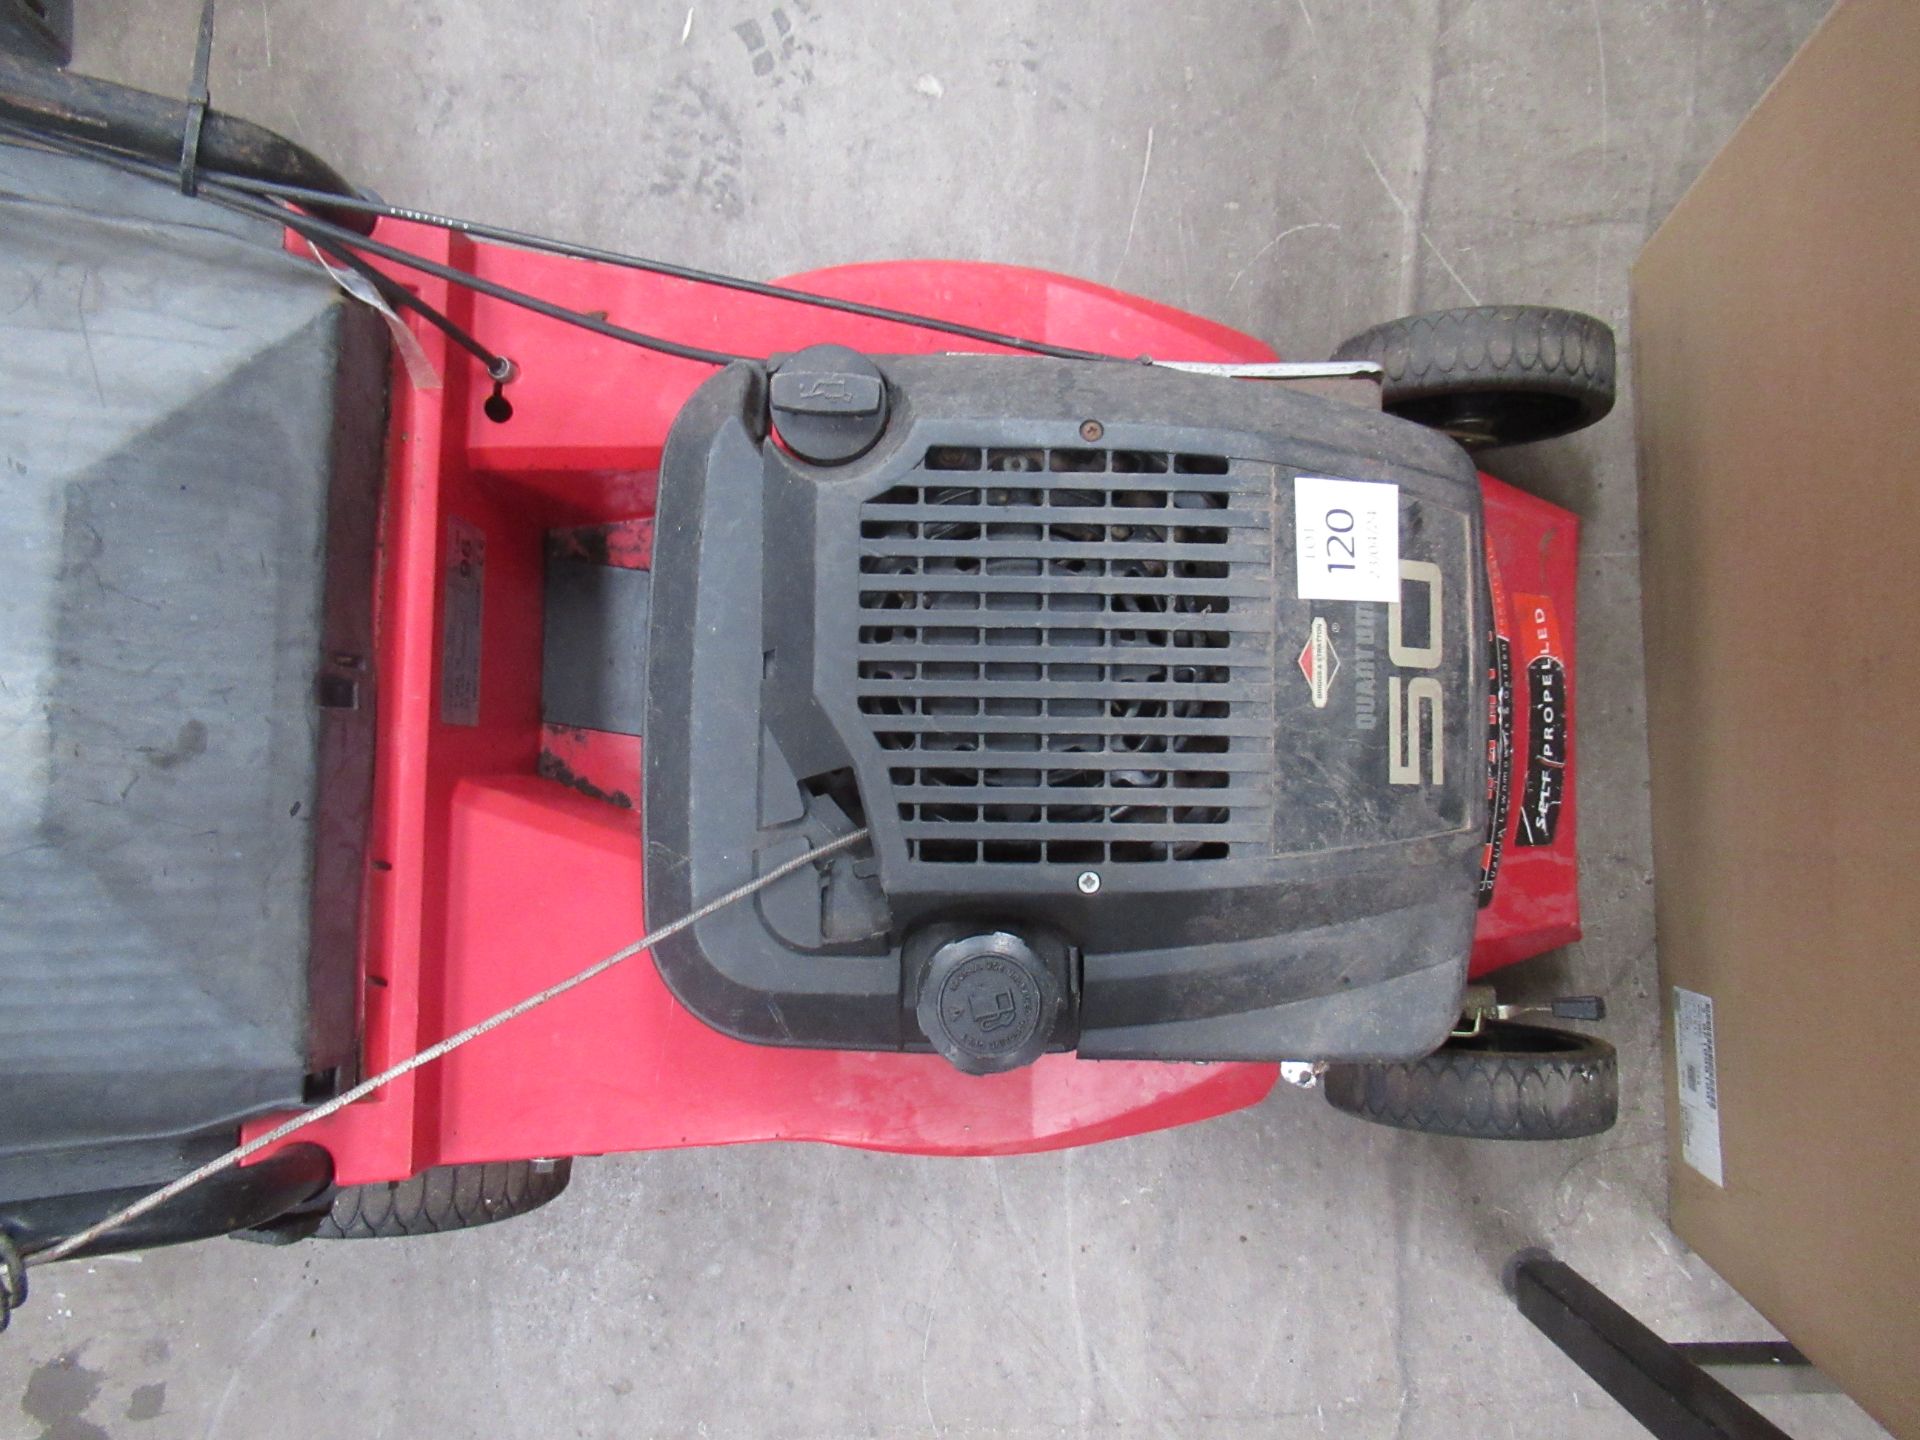 Champion 18" Self Propelled Lawn Mower - Image 2 of 4